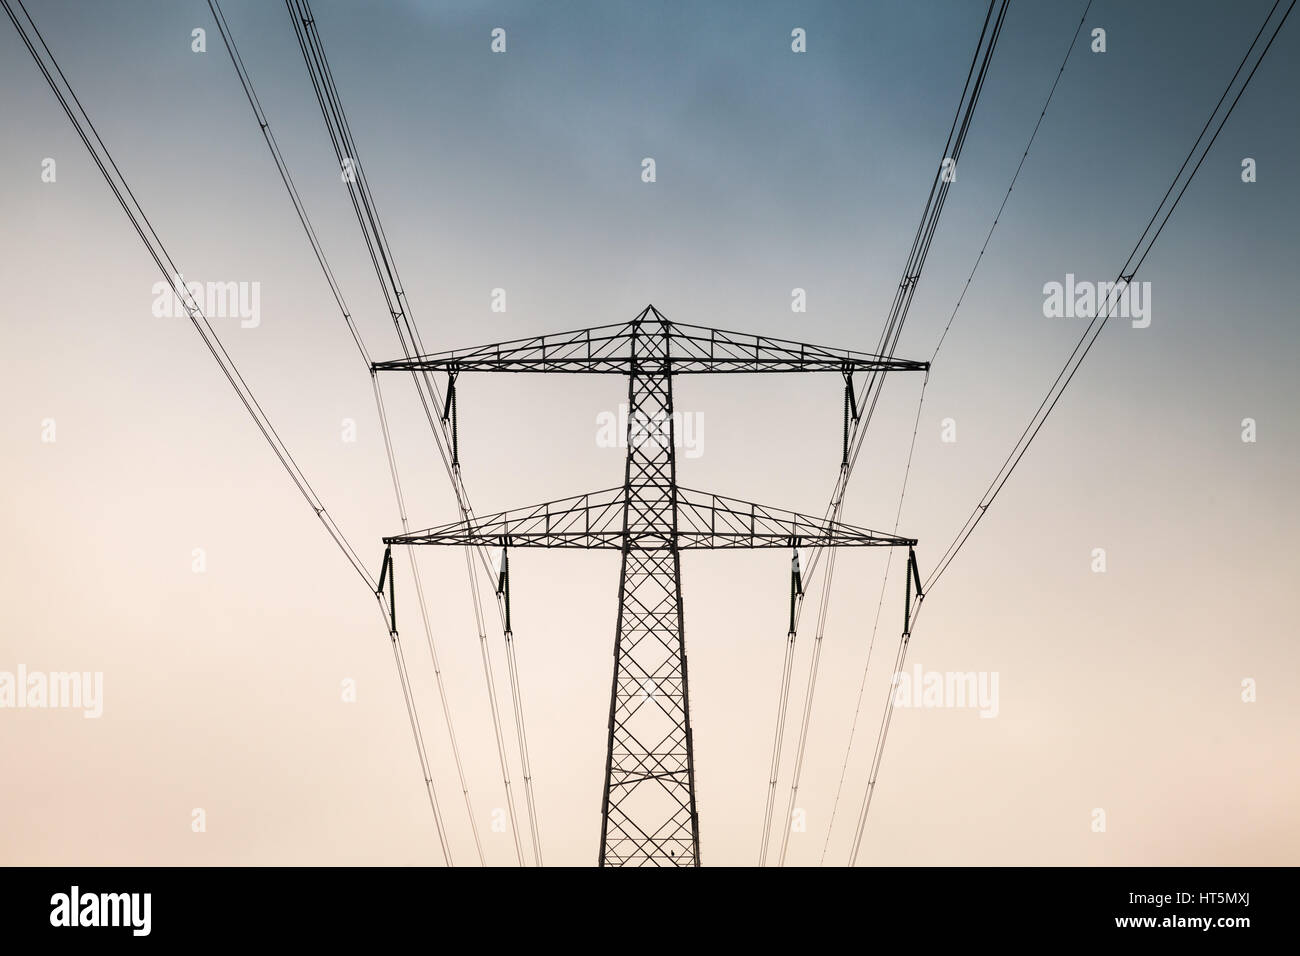 Transmission power tower, electricity pylon, front view. Steel lattice tower, used to support an overhead power line Stock Photo